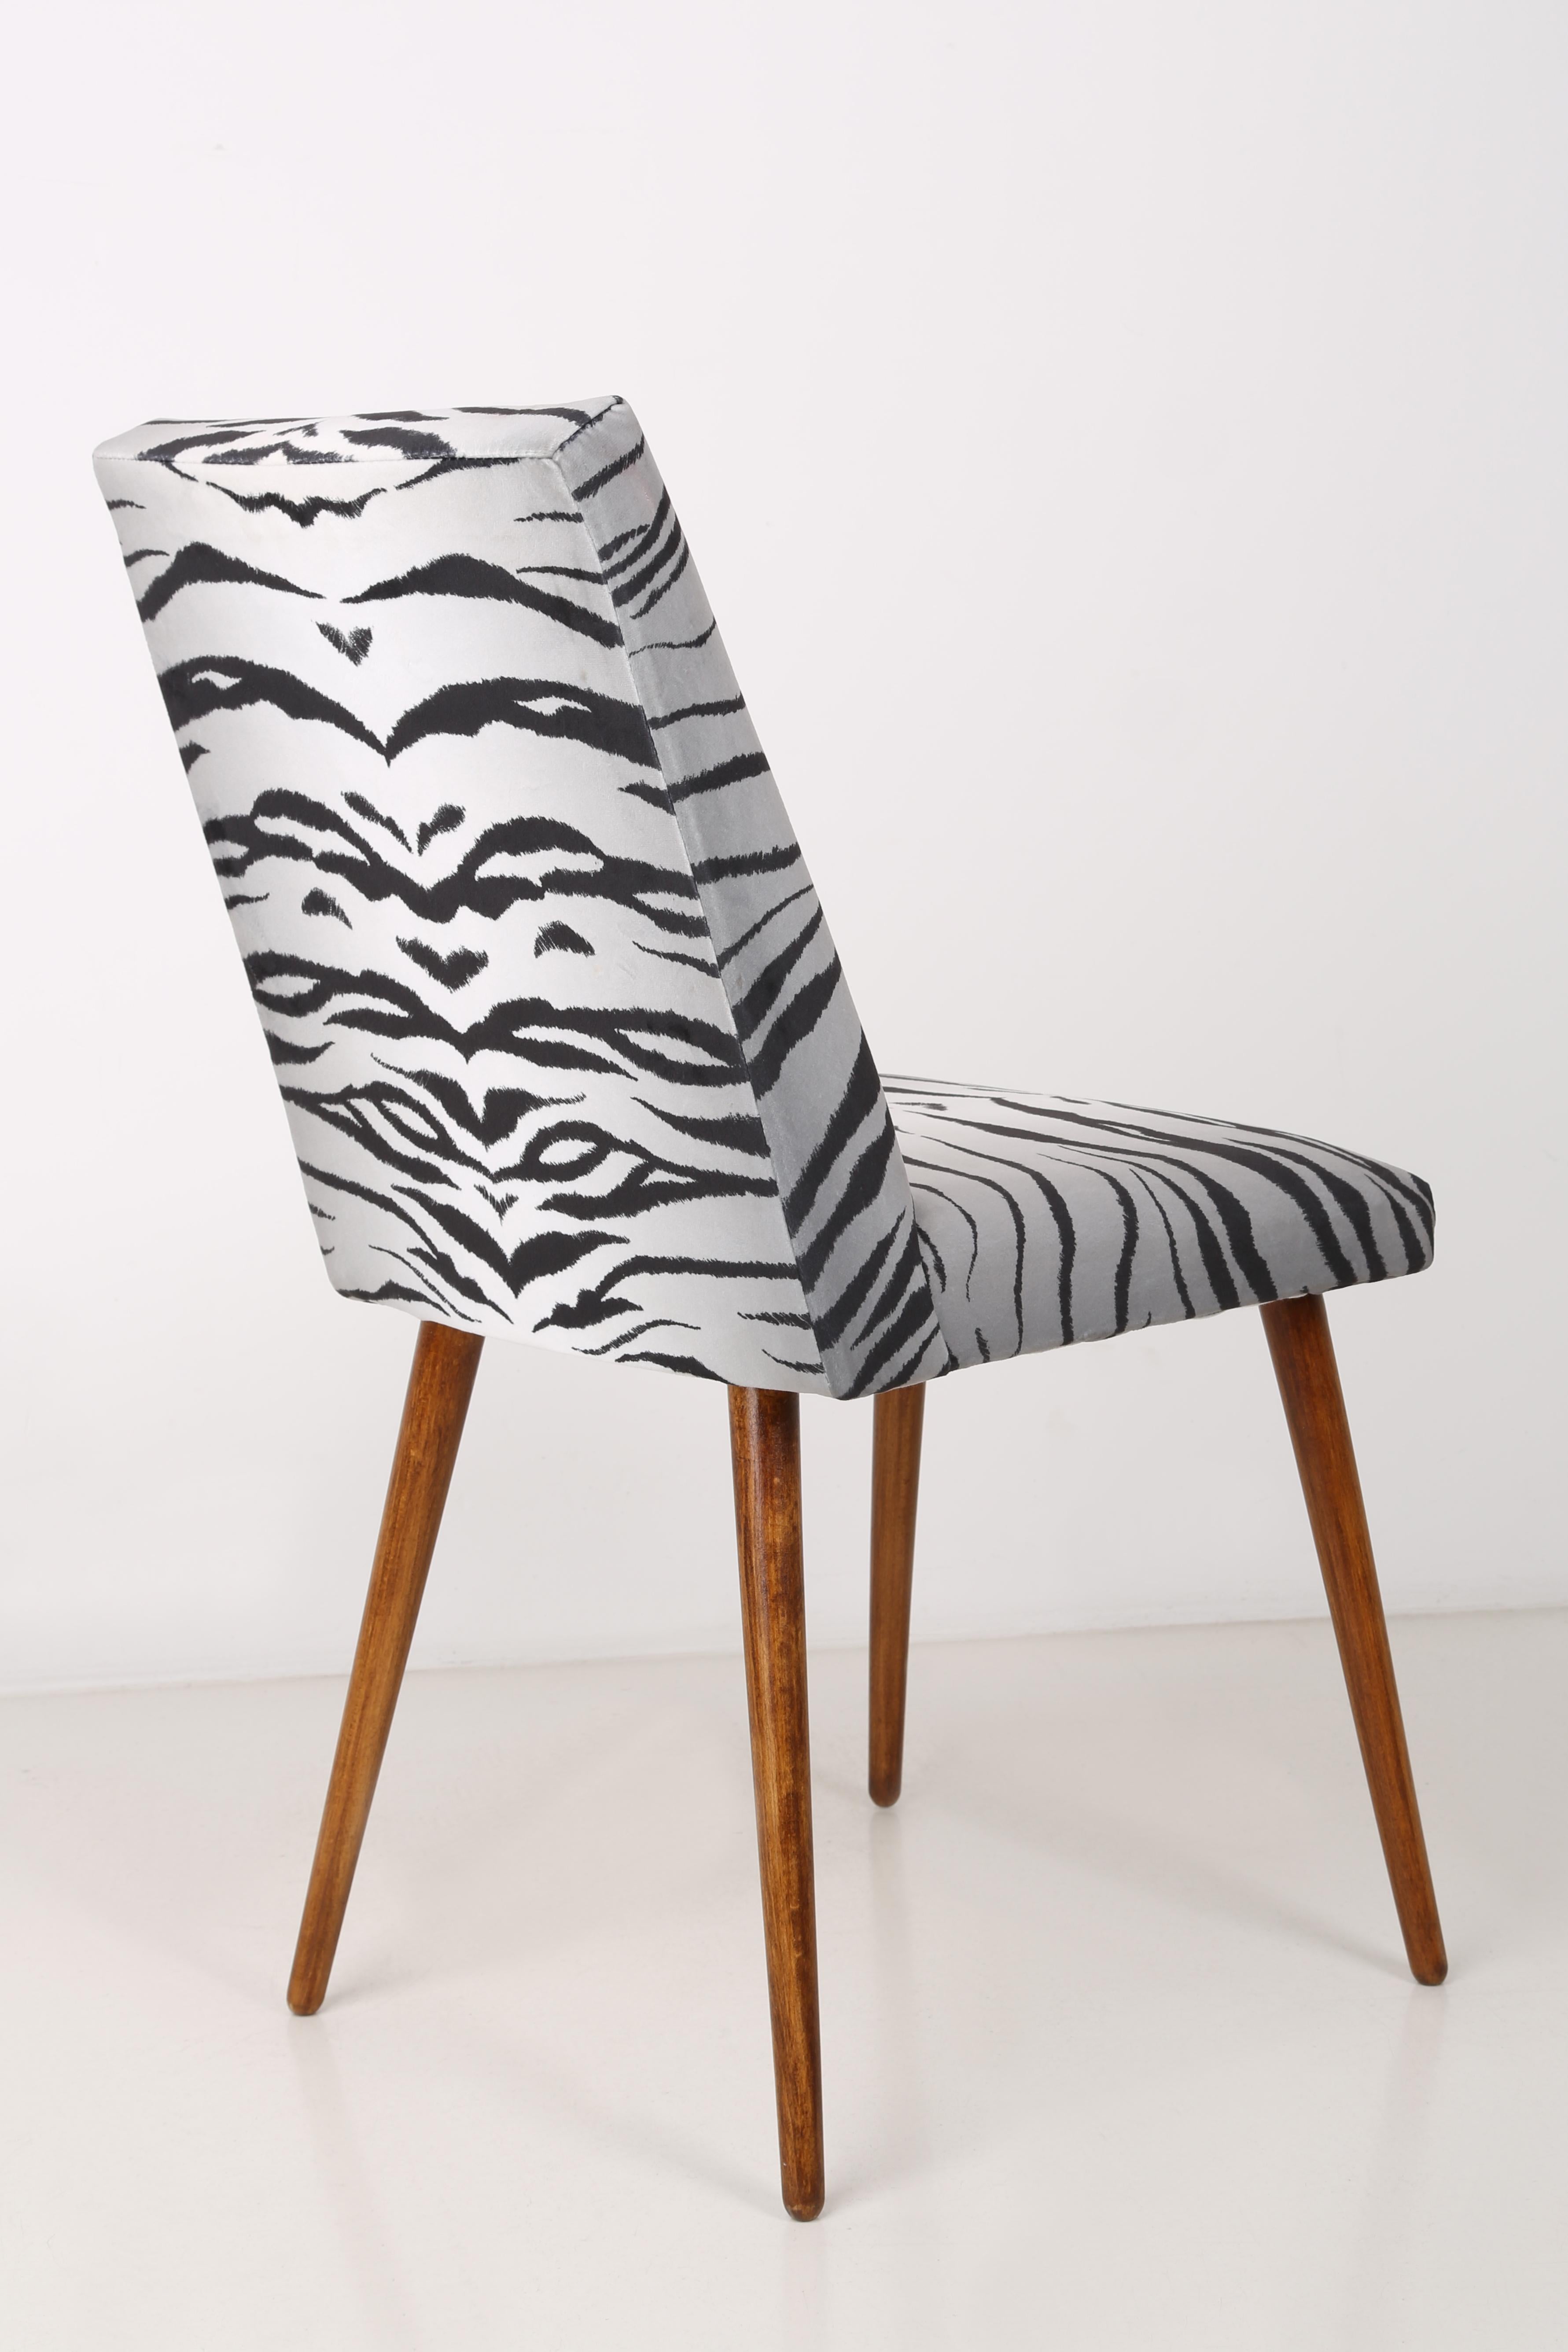 Hand-Crafted Set of Twelve 20th Century Black and White Zebra Velvet Chairs, Europe, 1960s For Sale